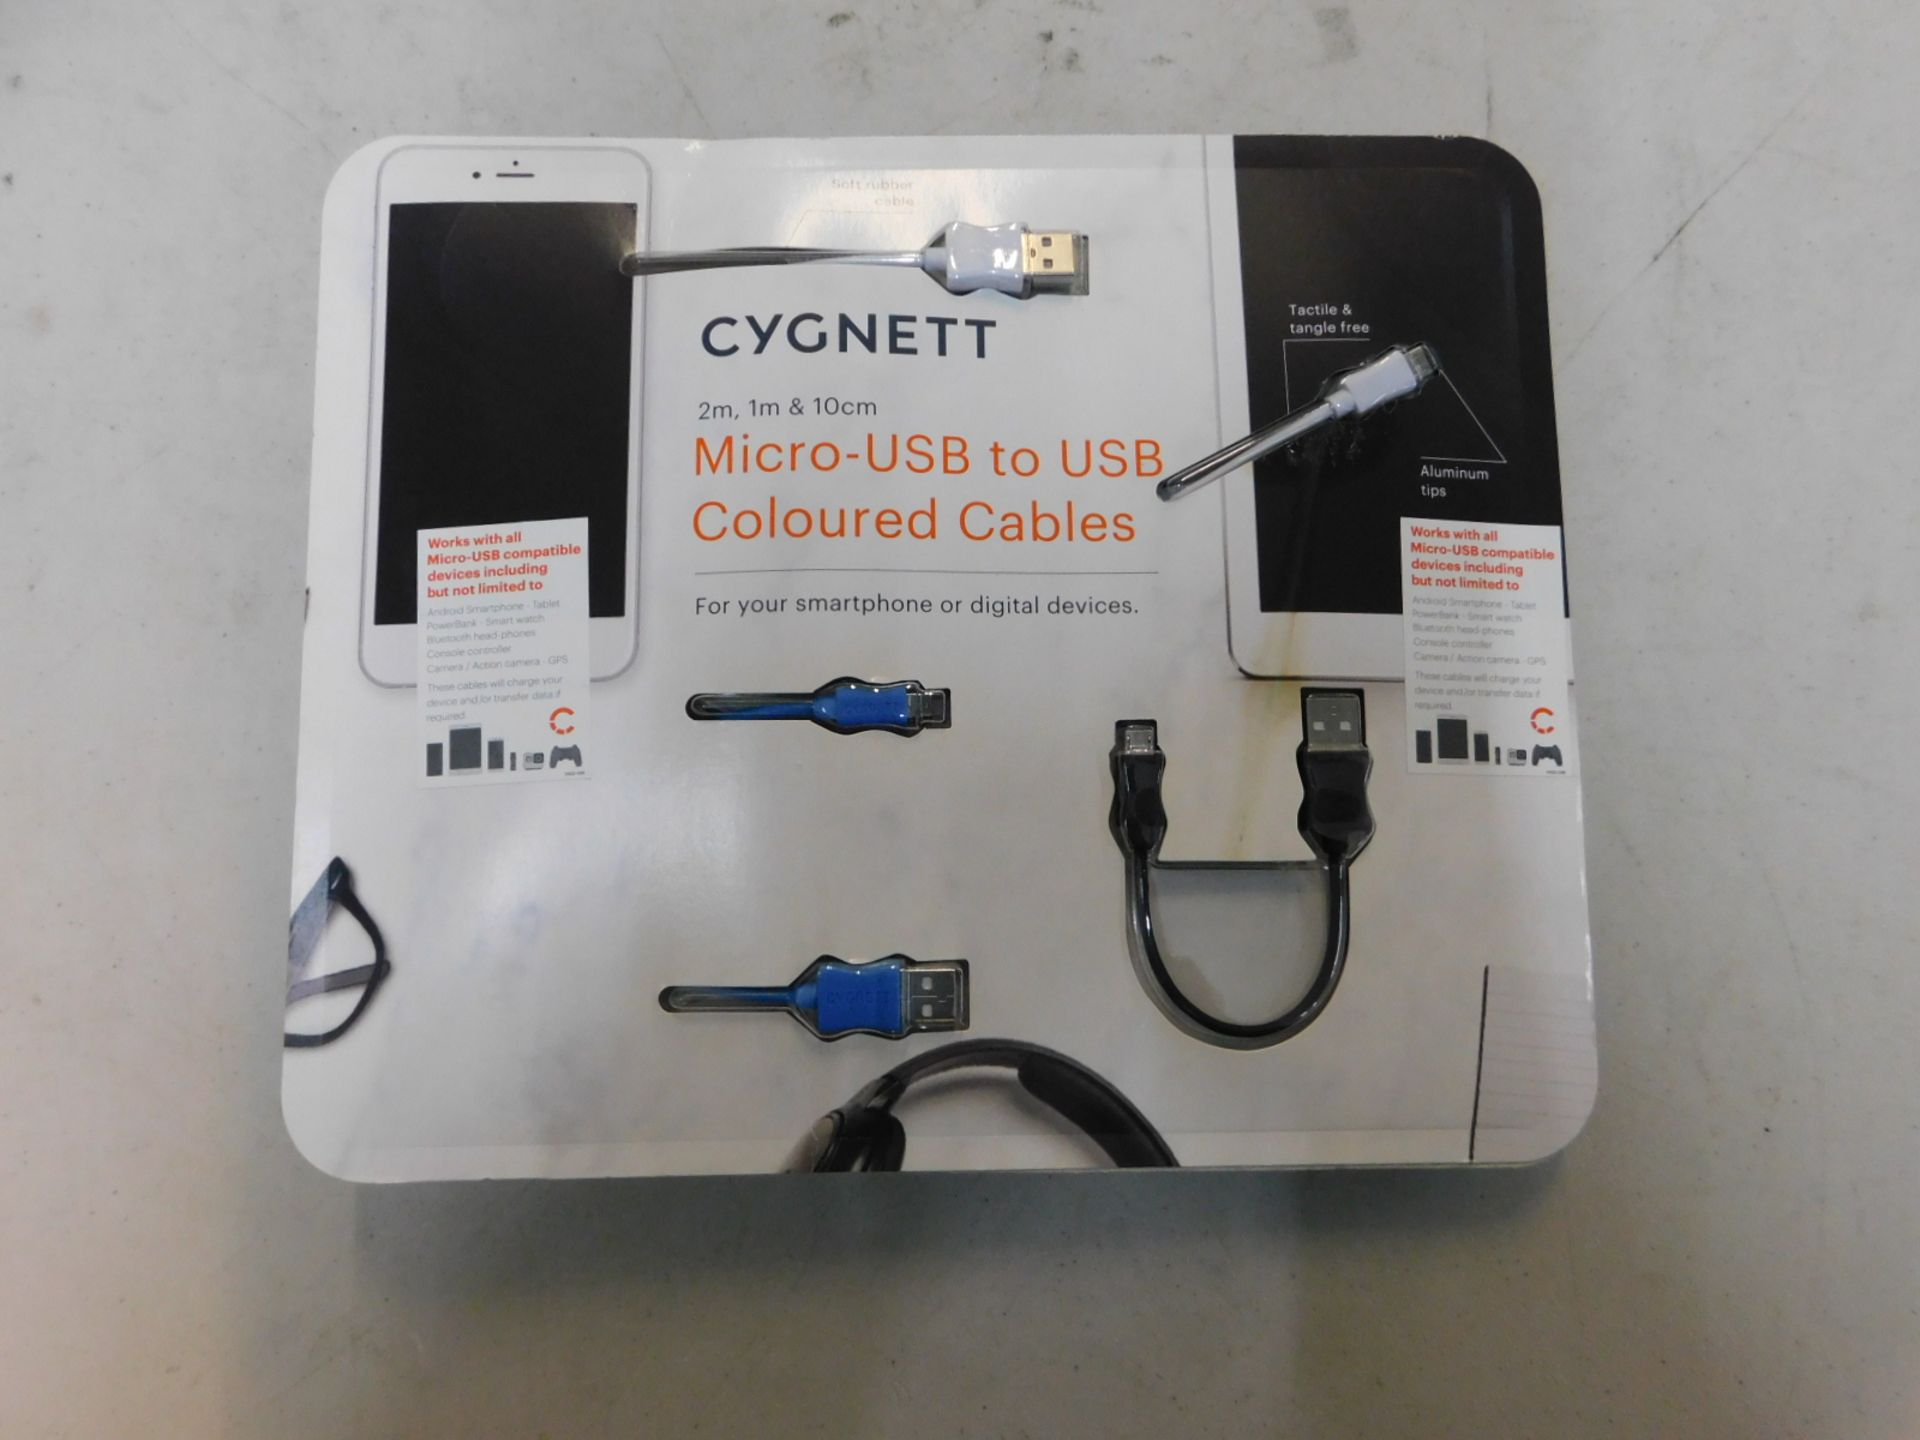 1 BRAND NEW PACK OF 3 CYGNETT MICRO USB TO USB COLOURED CABLES RRP Â£29.99